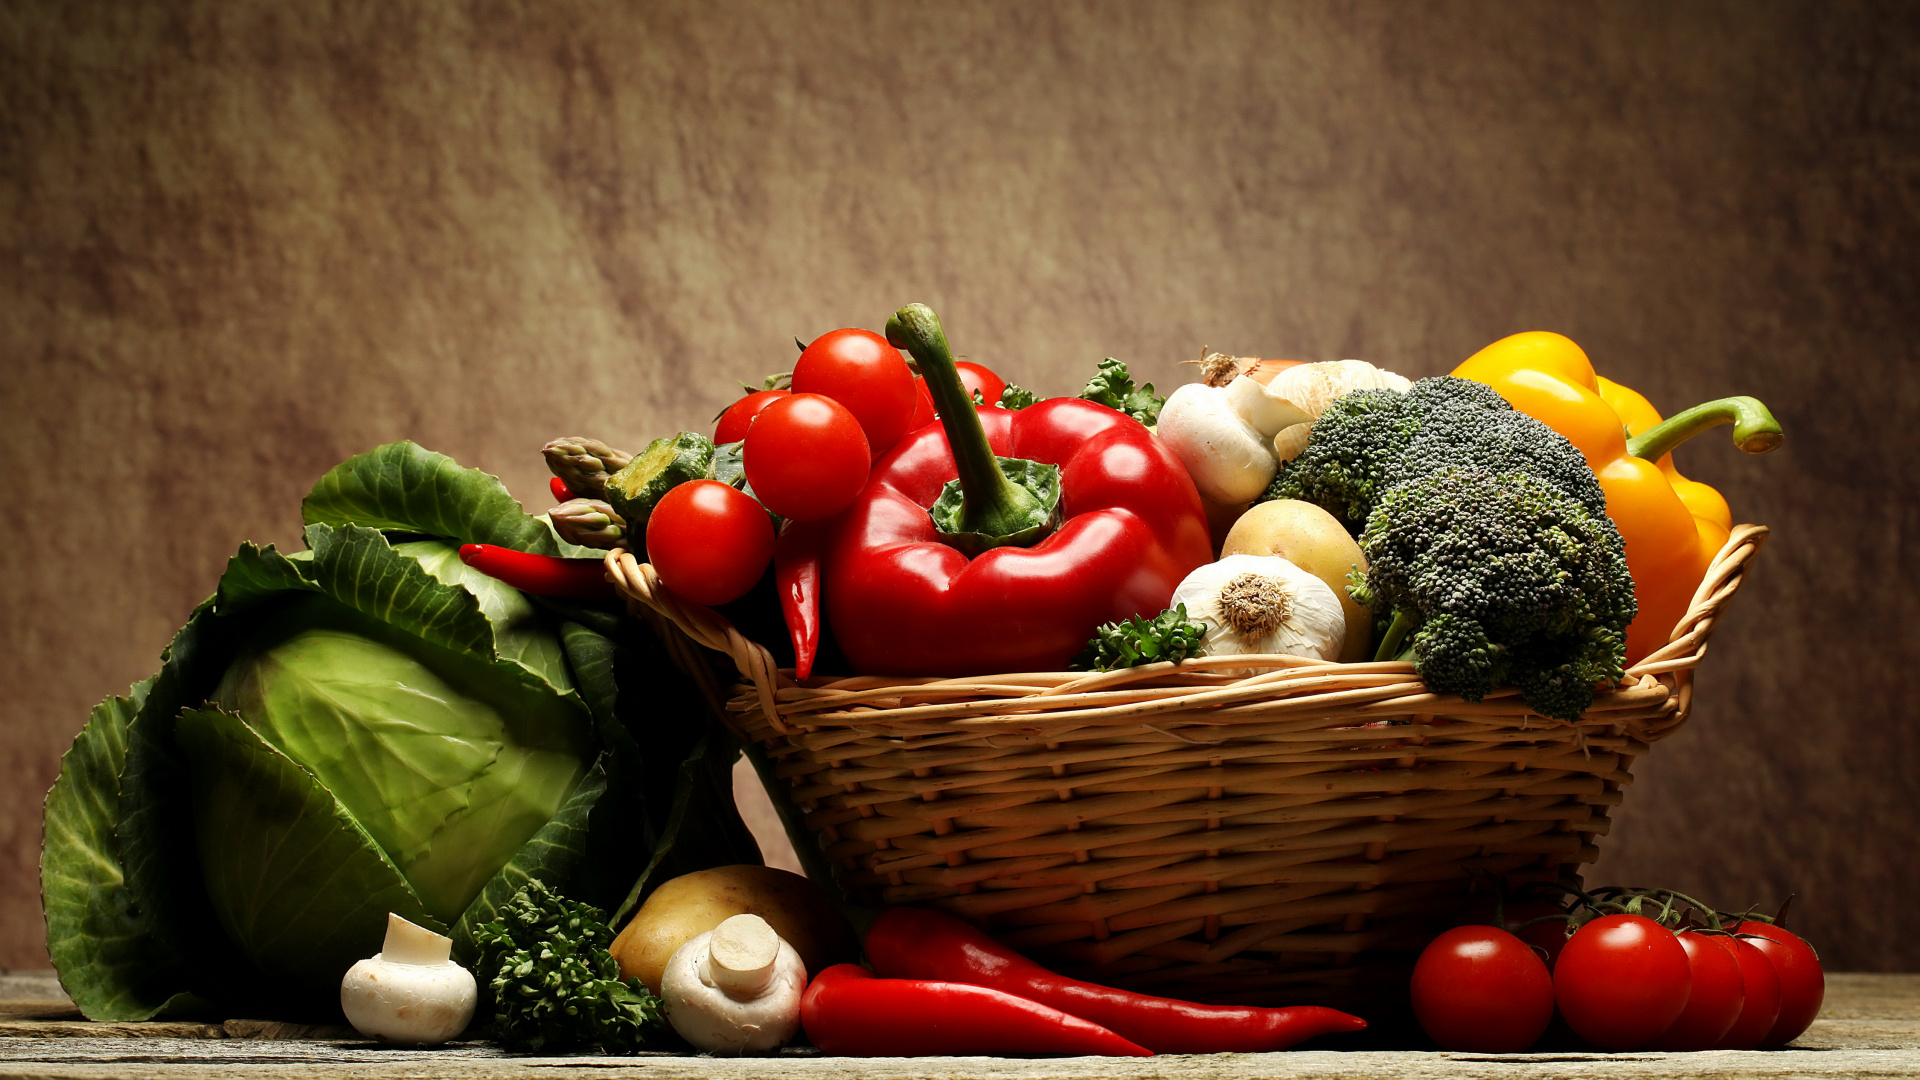 Red Tomatoes and Green Vegetable on Brown Woven Basket. Wallpaper in 1920x1080 Resolution